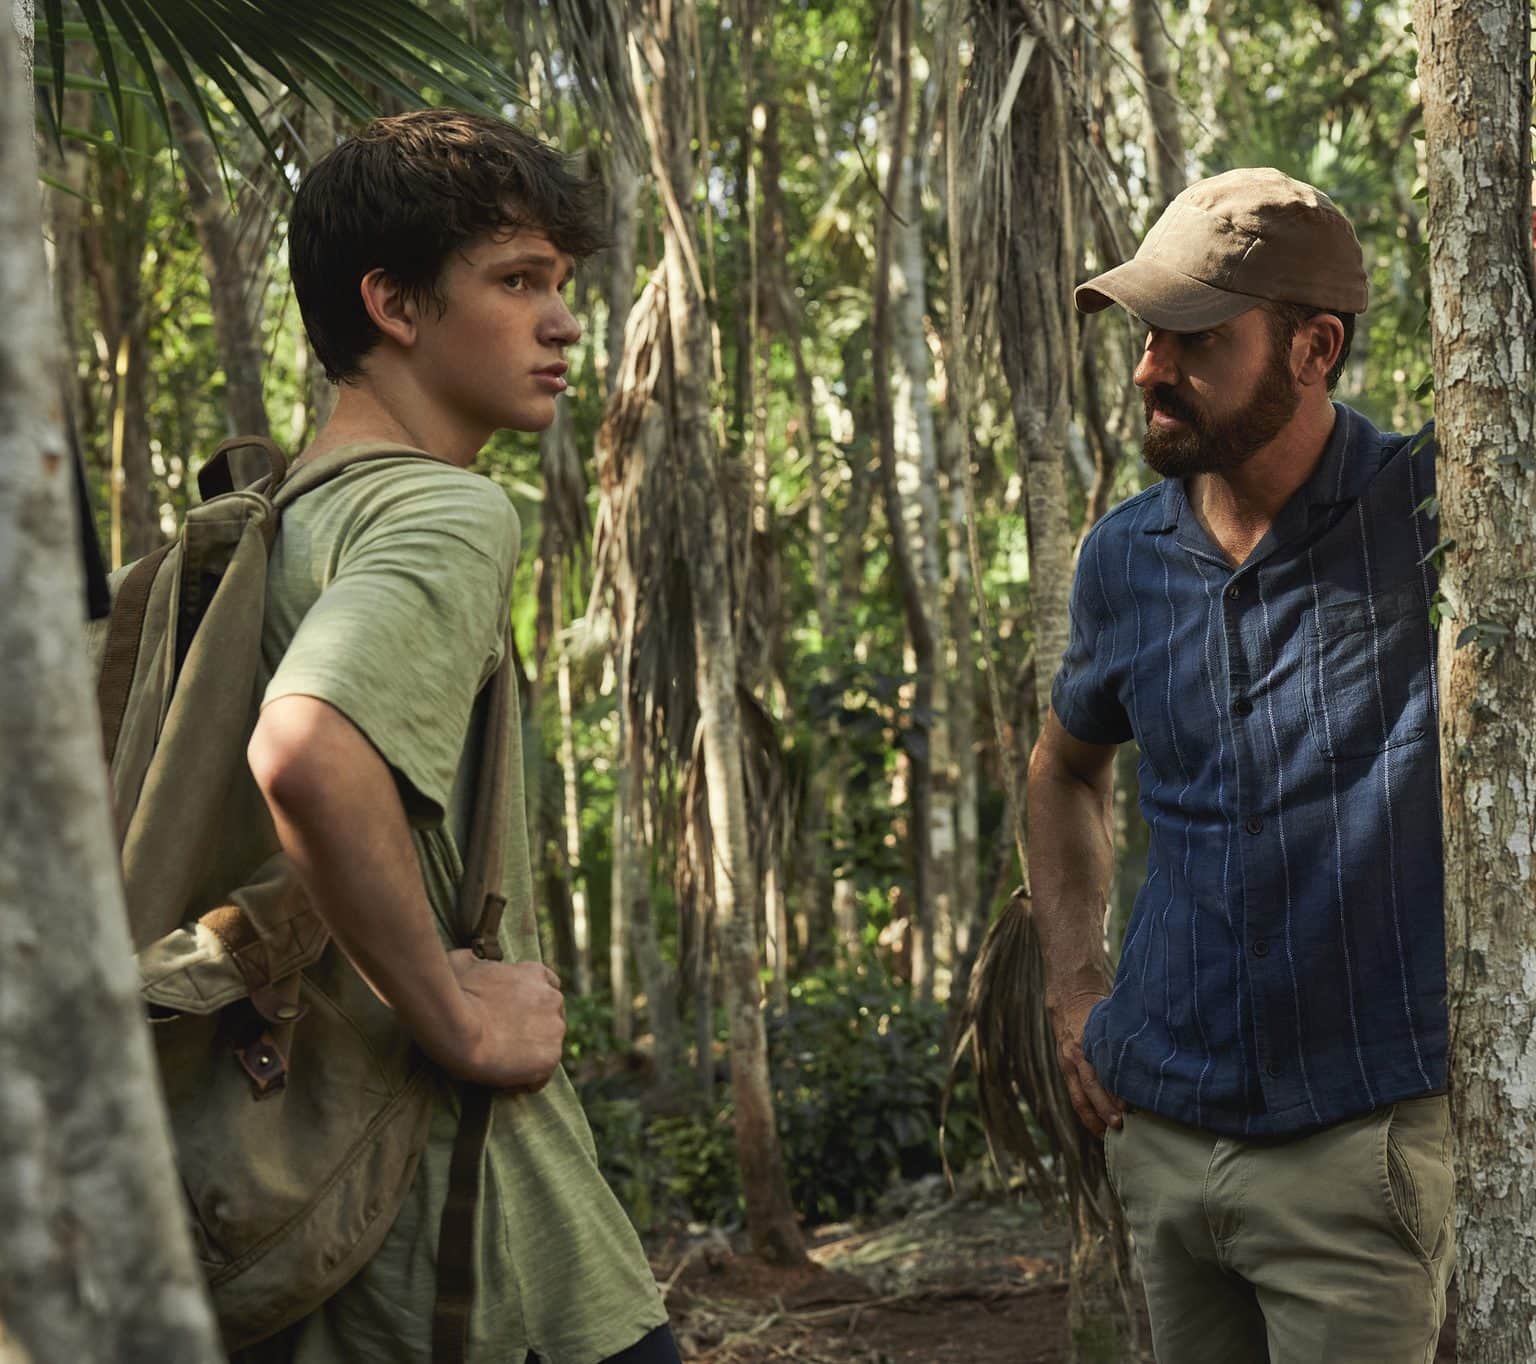 The Mosquito Coast recap Apple TV+: The members of the Fox family face troubles old and new this week.